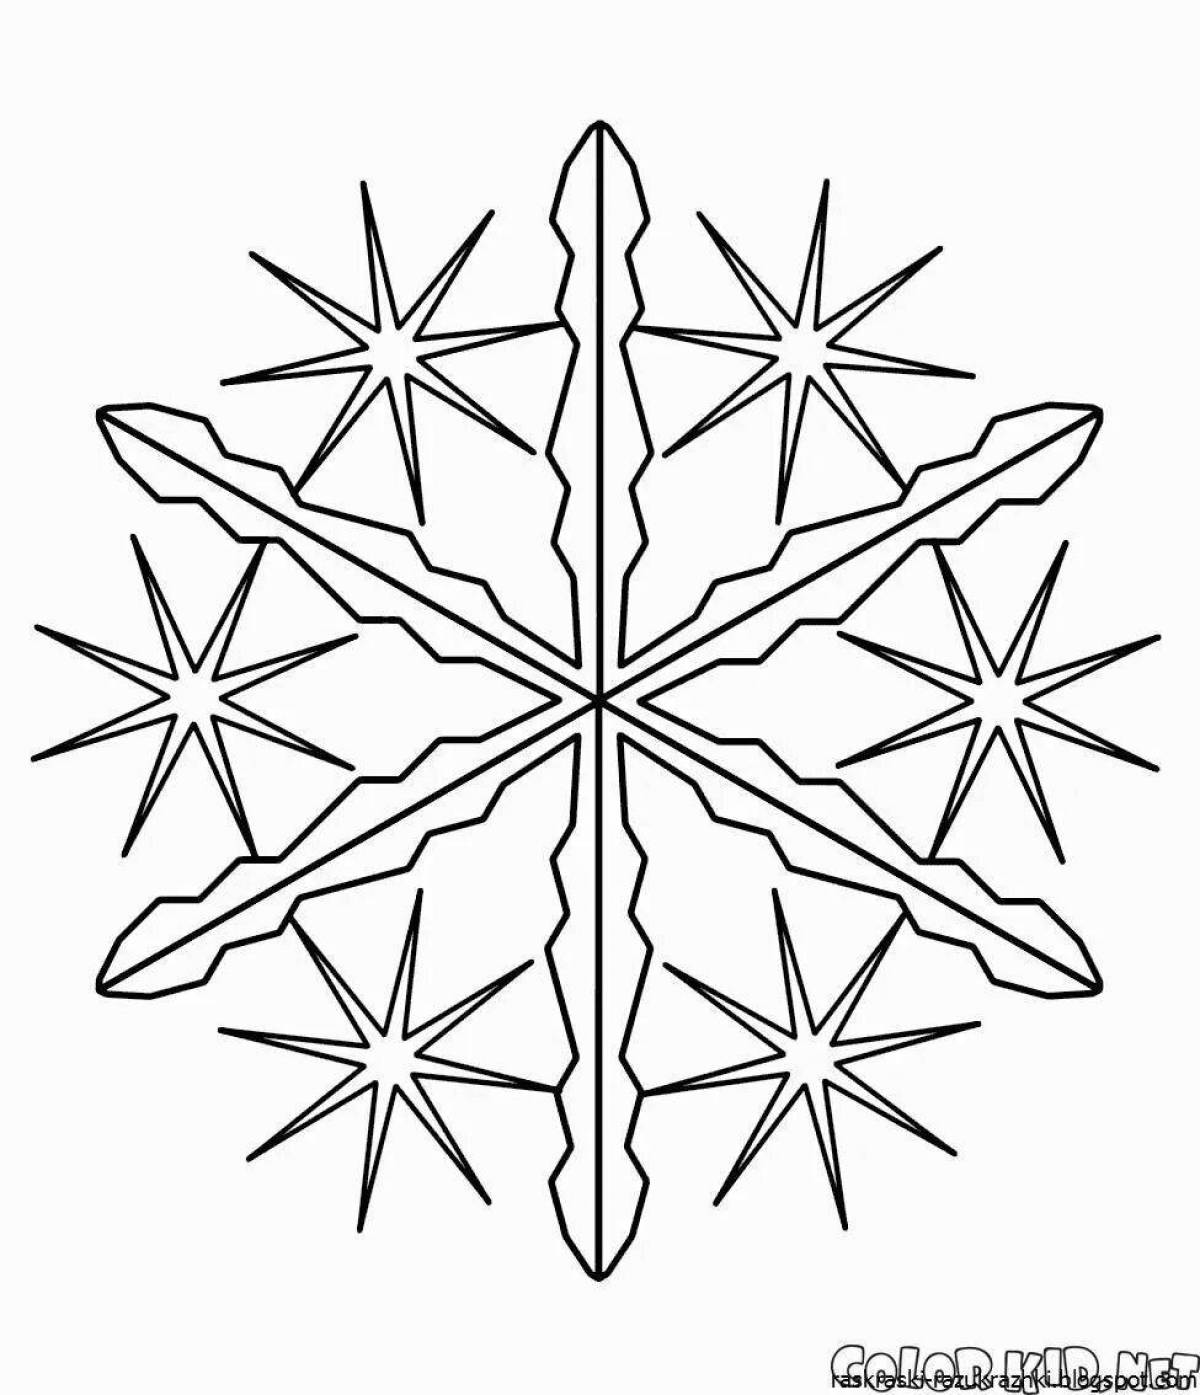 Adorable snowflake coloring pages for 4-5 year olds